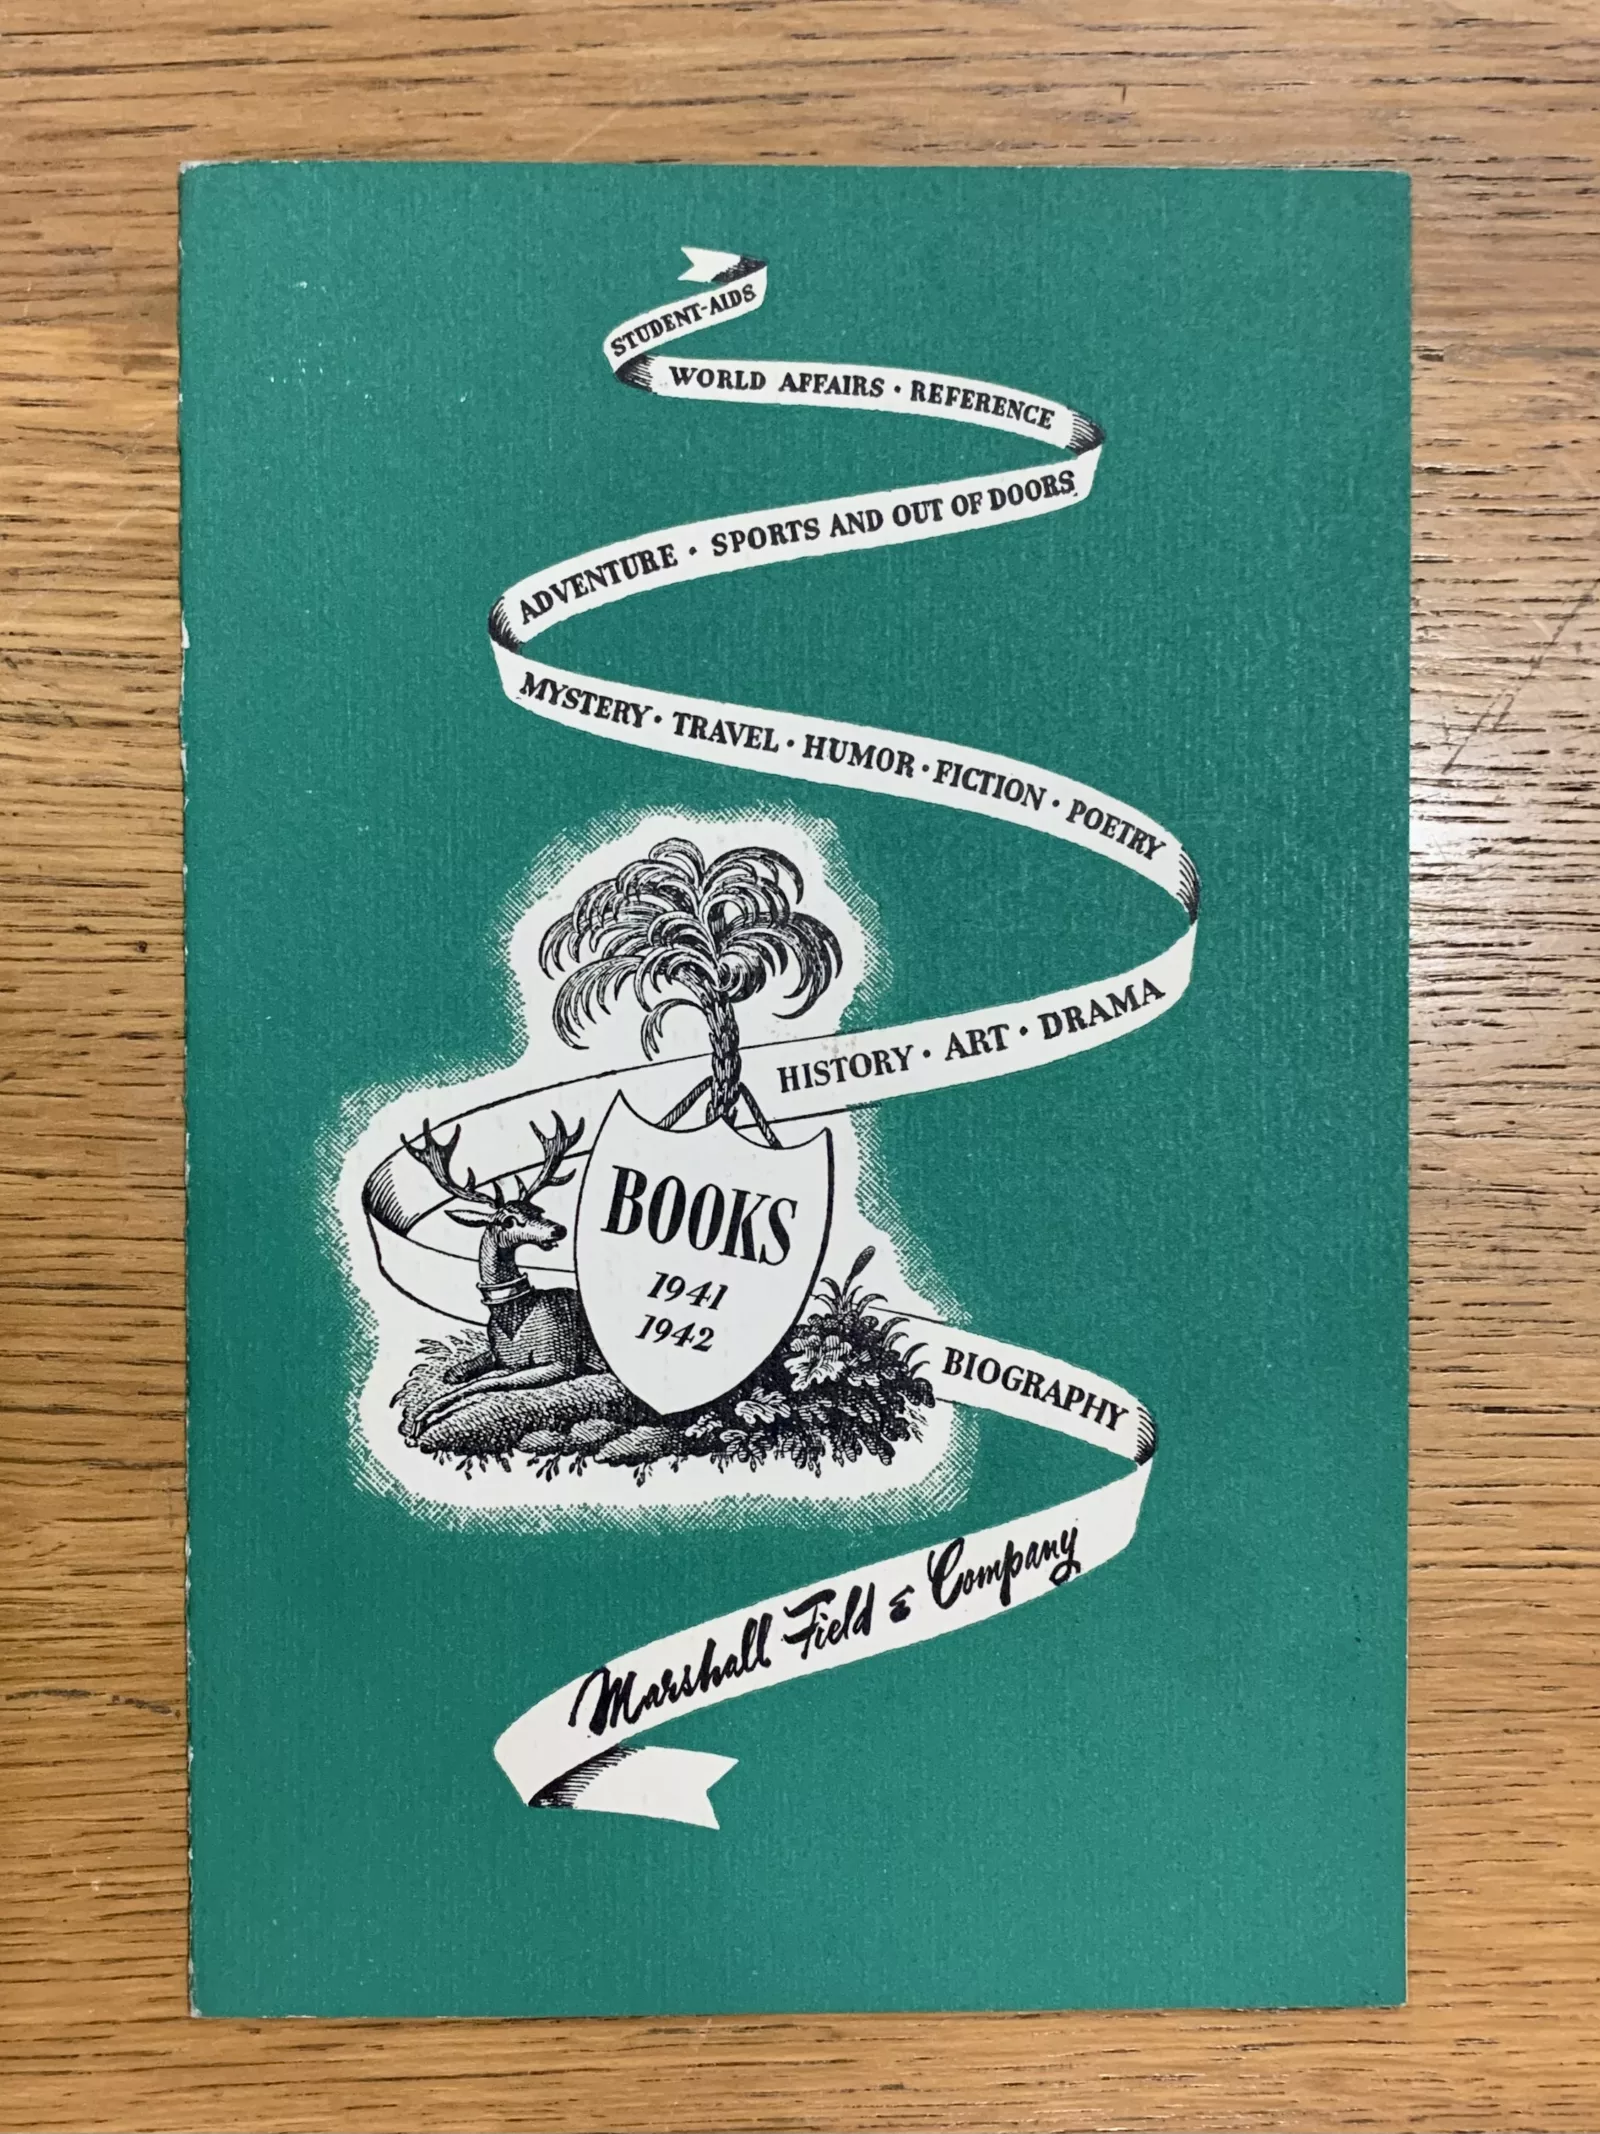 Promotional material Hayes created for the Marshall Field & Company on green card stock. The piece reads, "Books 1941-1942. Student aids, world affairs, reference, adventure, sports and out of doors, mystery, travel, humor, fiction, poetry, history, art, drama, biography. Marshall Field & Company."